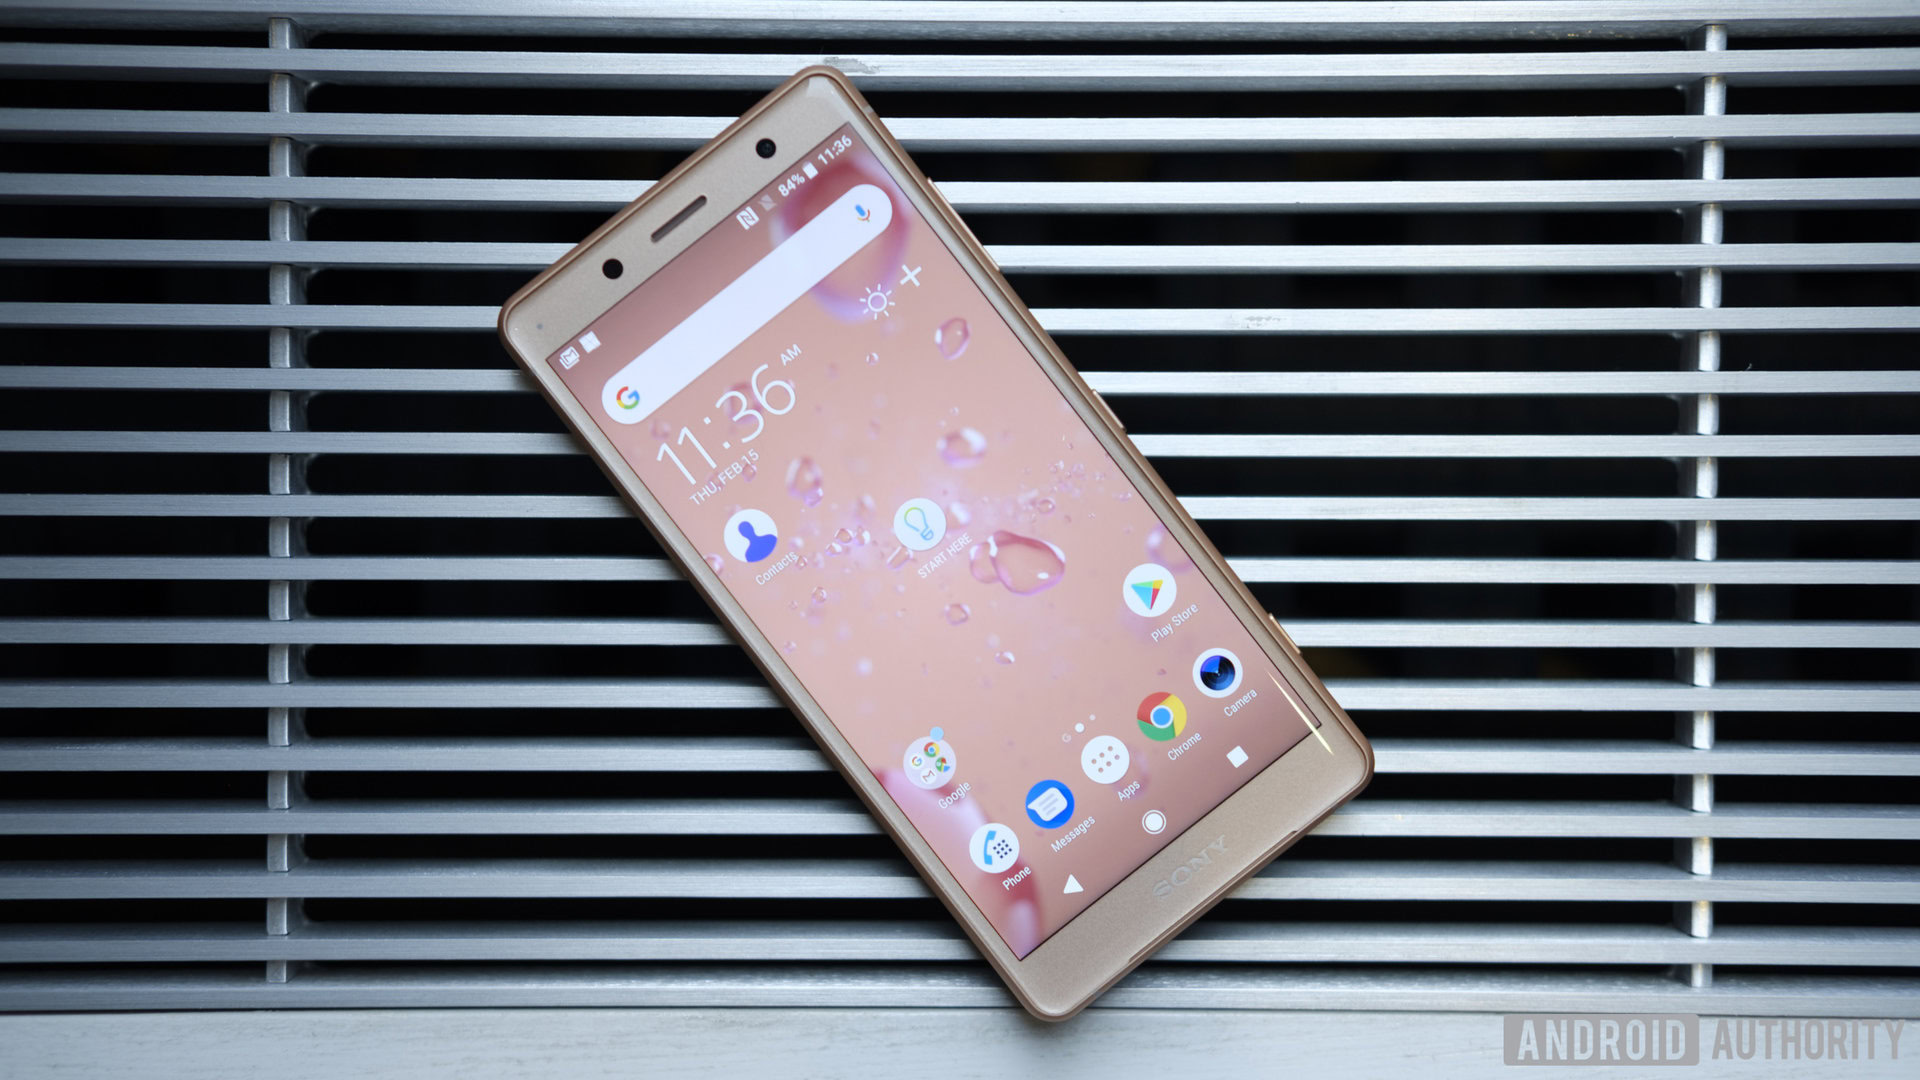 Sympathiek bende Warmte Sony Xperia XZ2 and XZ2 Compact: Price and availability details (Update:  Pre-order now!) - Android Authority